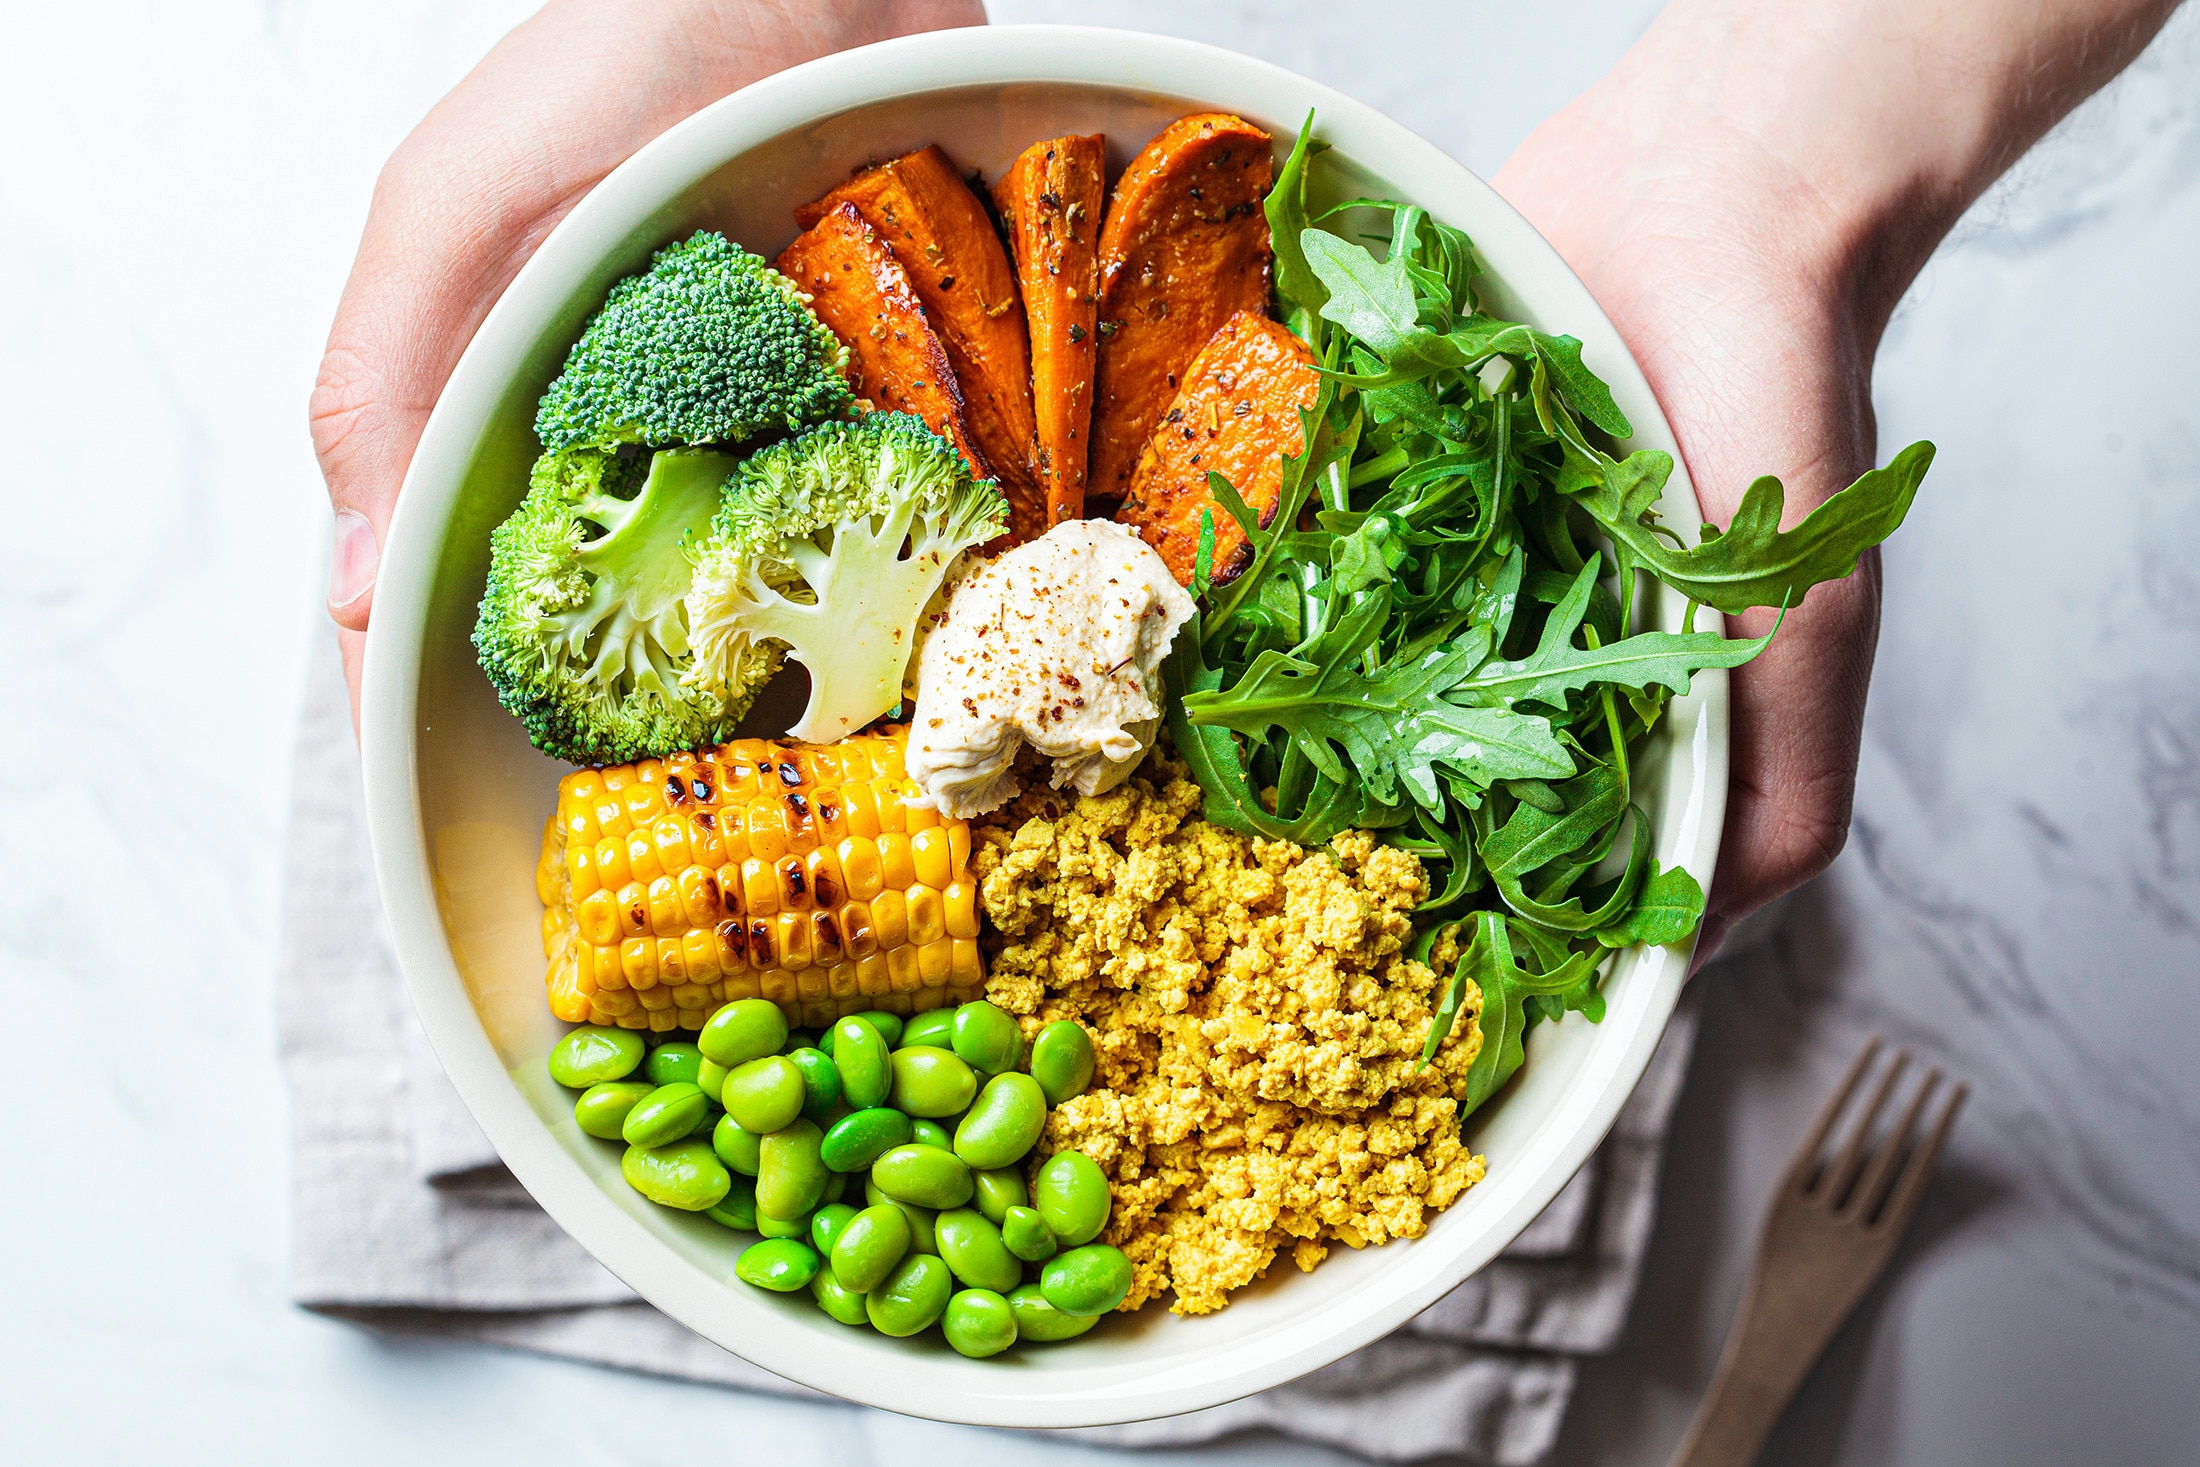 A bowl of roasted high-protein vegetables, including broccoli, corn, and edamame